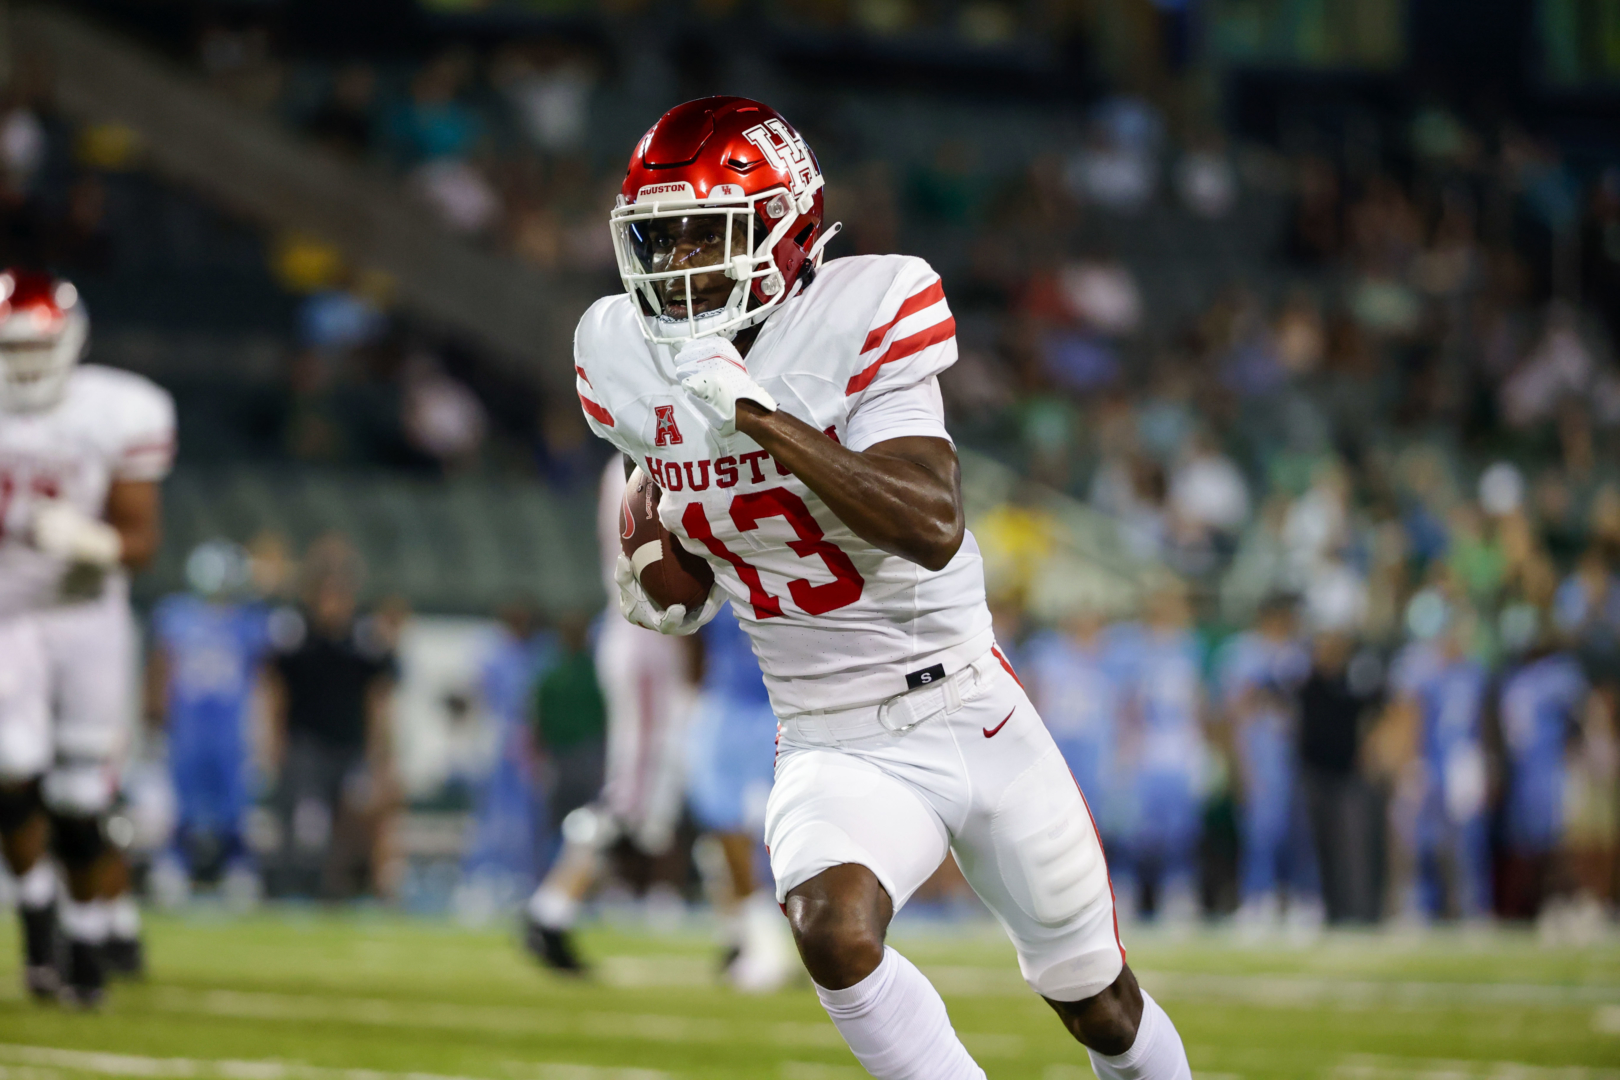 Jeremy Singleton, a New Orleans native, scored two touchdowns in UH football's victory over Tulane on Thursday night. | Courtesy of UH athletics